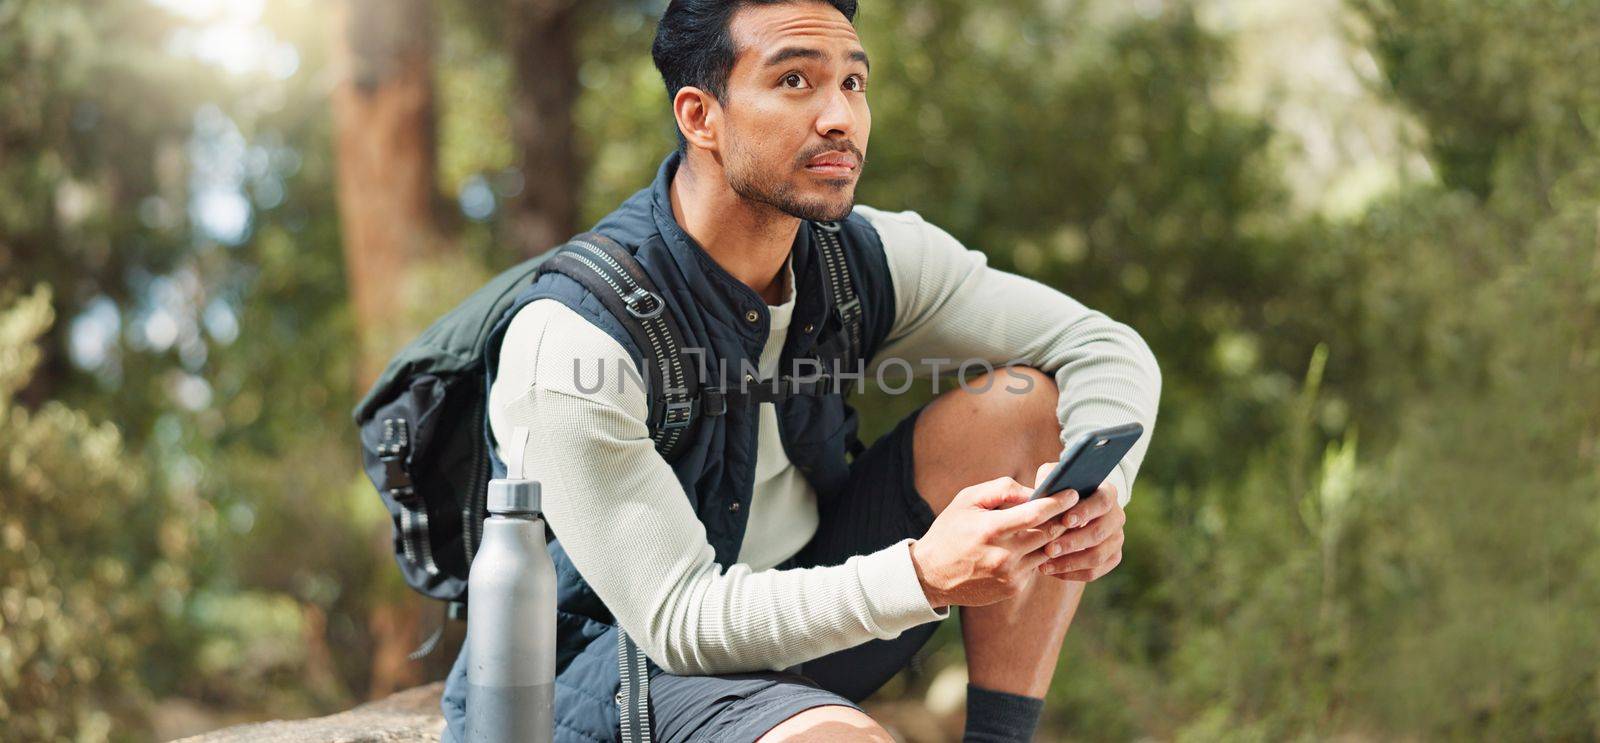 Phone, hiking and man in nature for a gps location, travel and freedom in mountains of Peru during a holiday. Young, thinking and Asian man with a mobile for communication while trekking in a forest.